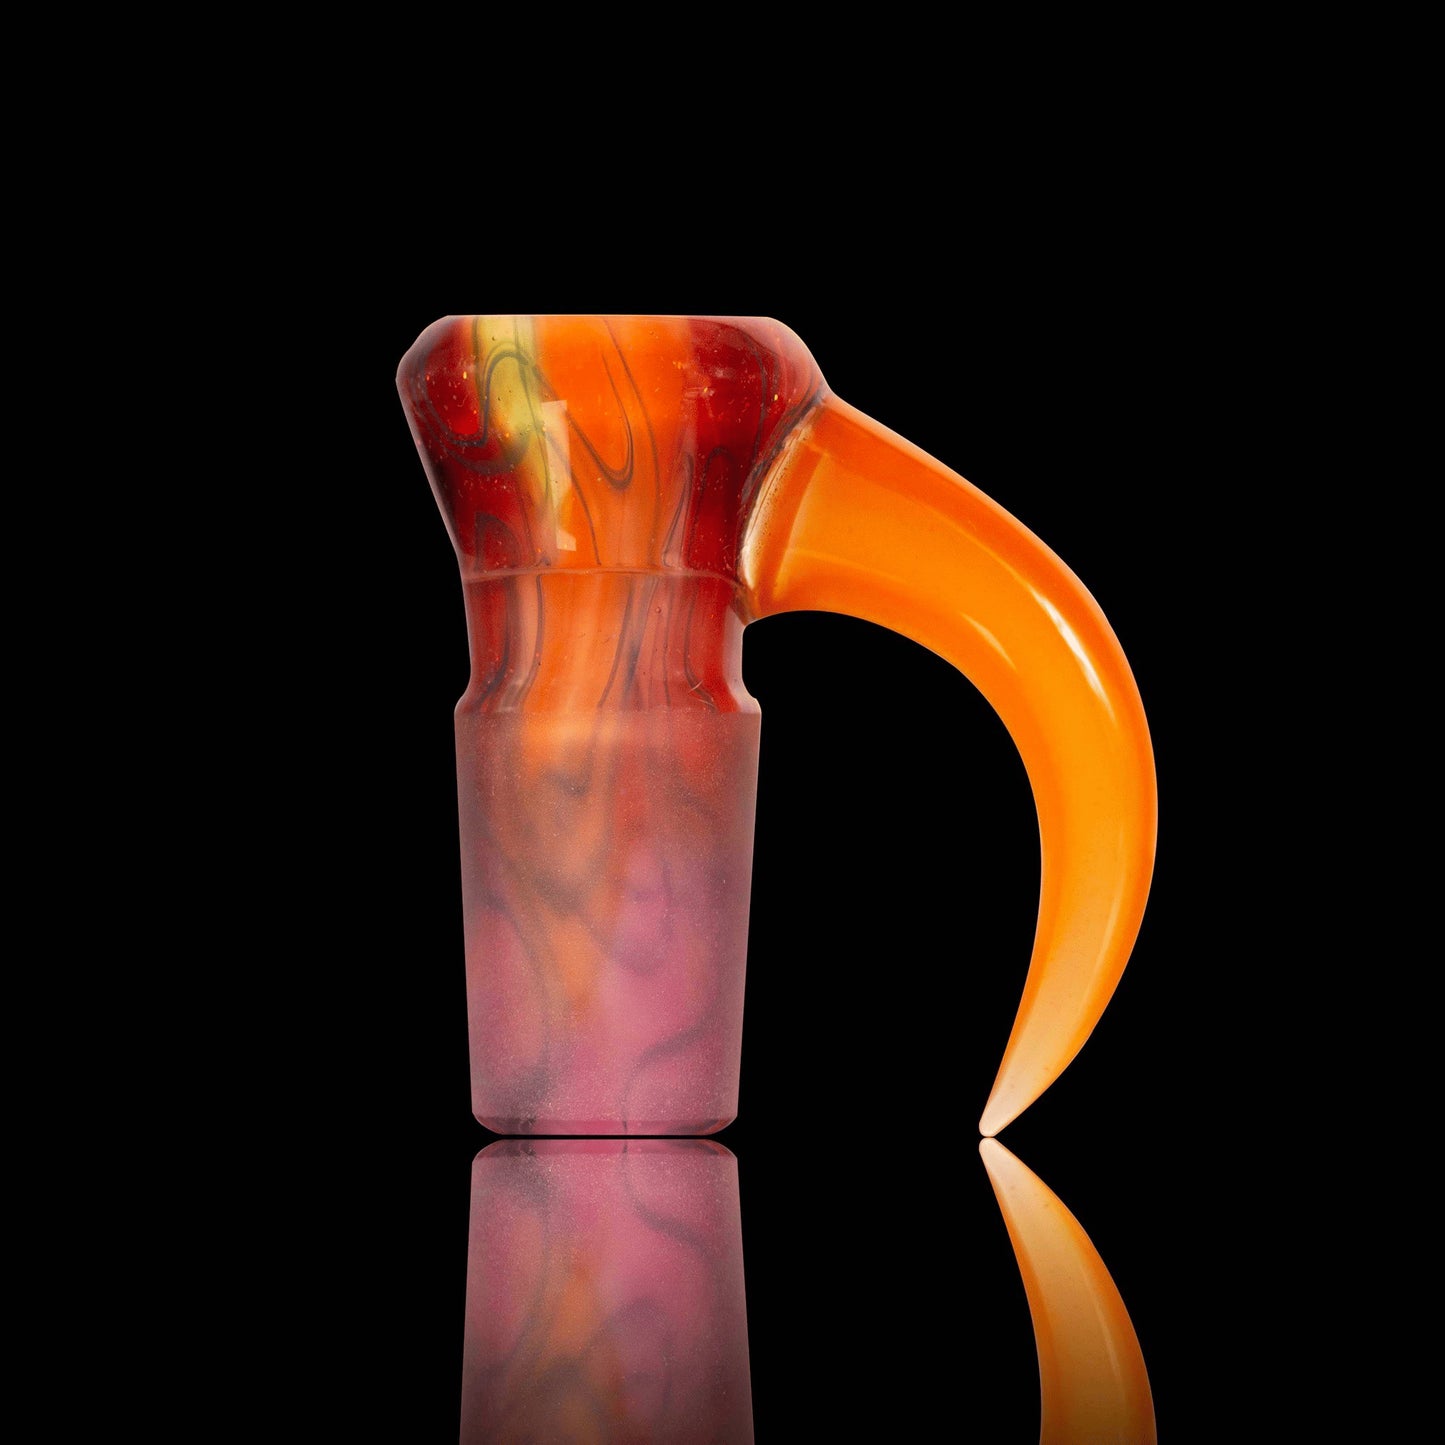 sophisticated art piece - Male 18mm Slide (C) by Shamby Glass x Scomo Moanet (2021)